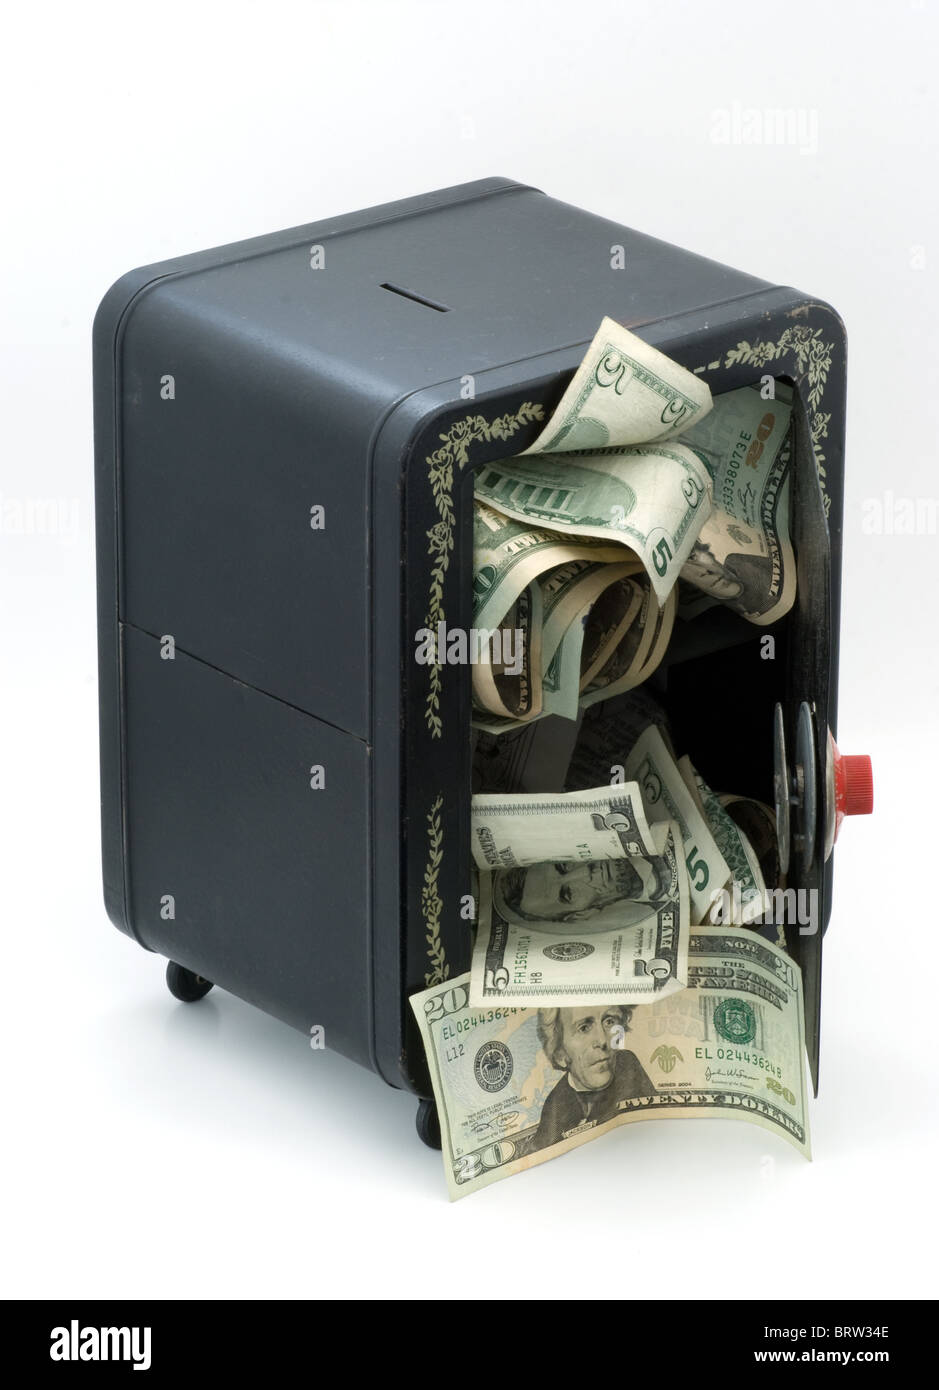 Money falling out of favor. USA dollars or American paper money tumbling from old toy bank safe with open door . Stock Photo